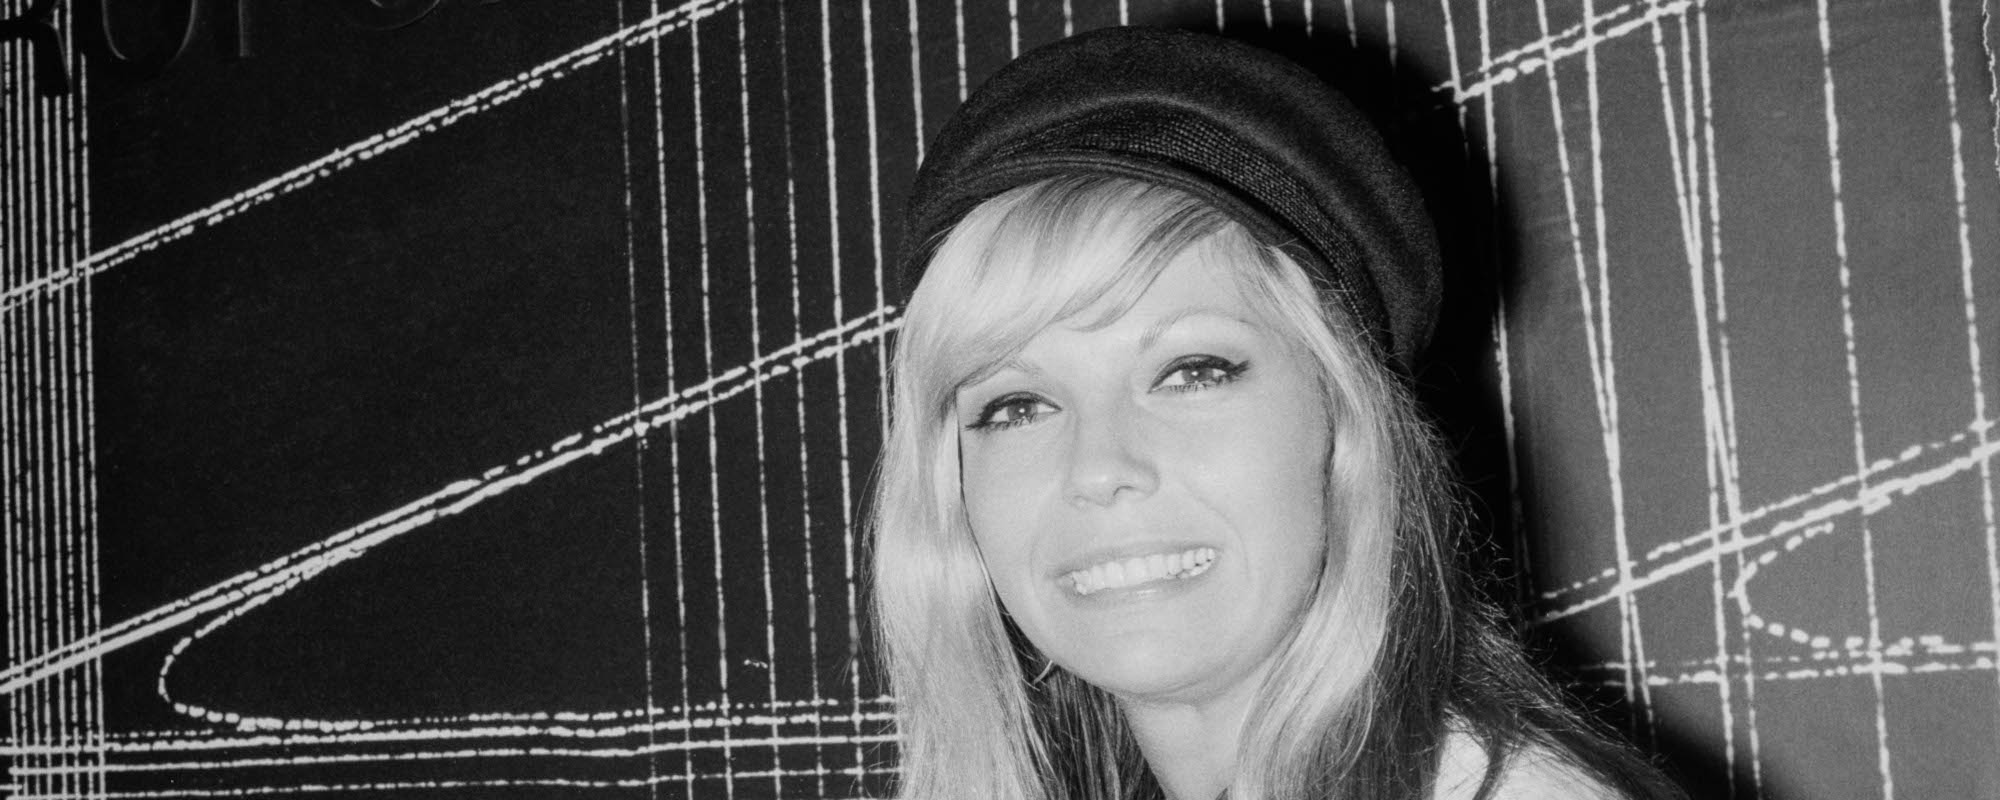 Meet the Eclectic Writer Behind Nancy Sinatra’s “These Boots Are Made for Walkin'”